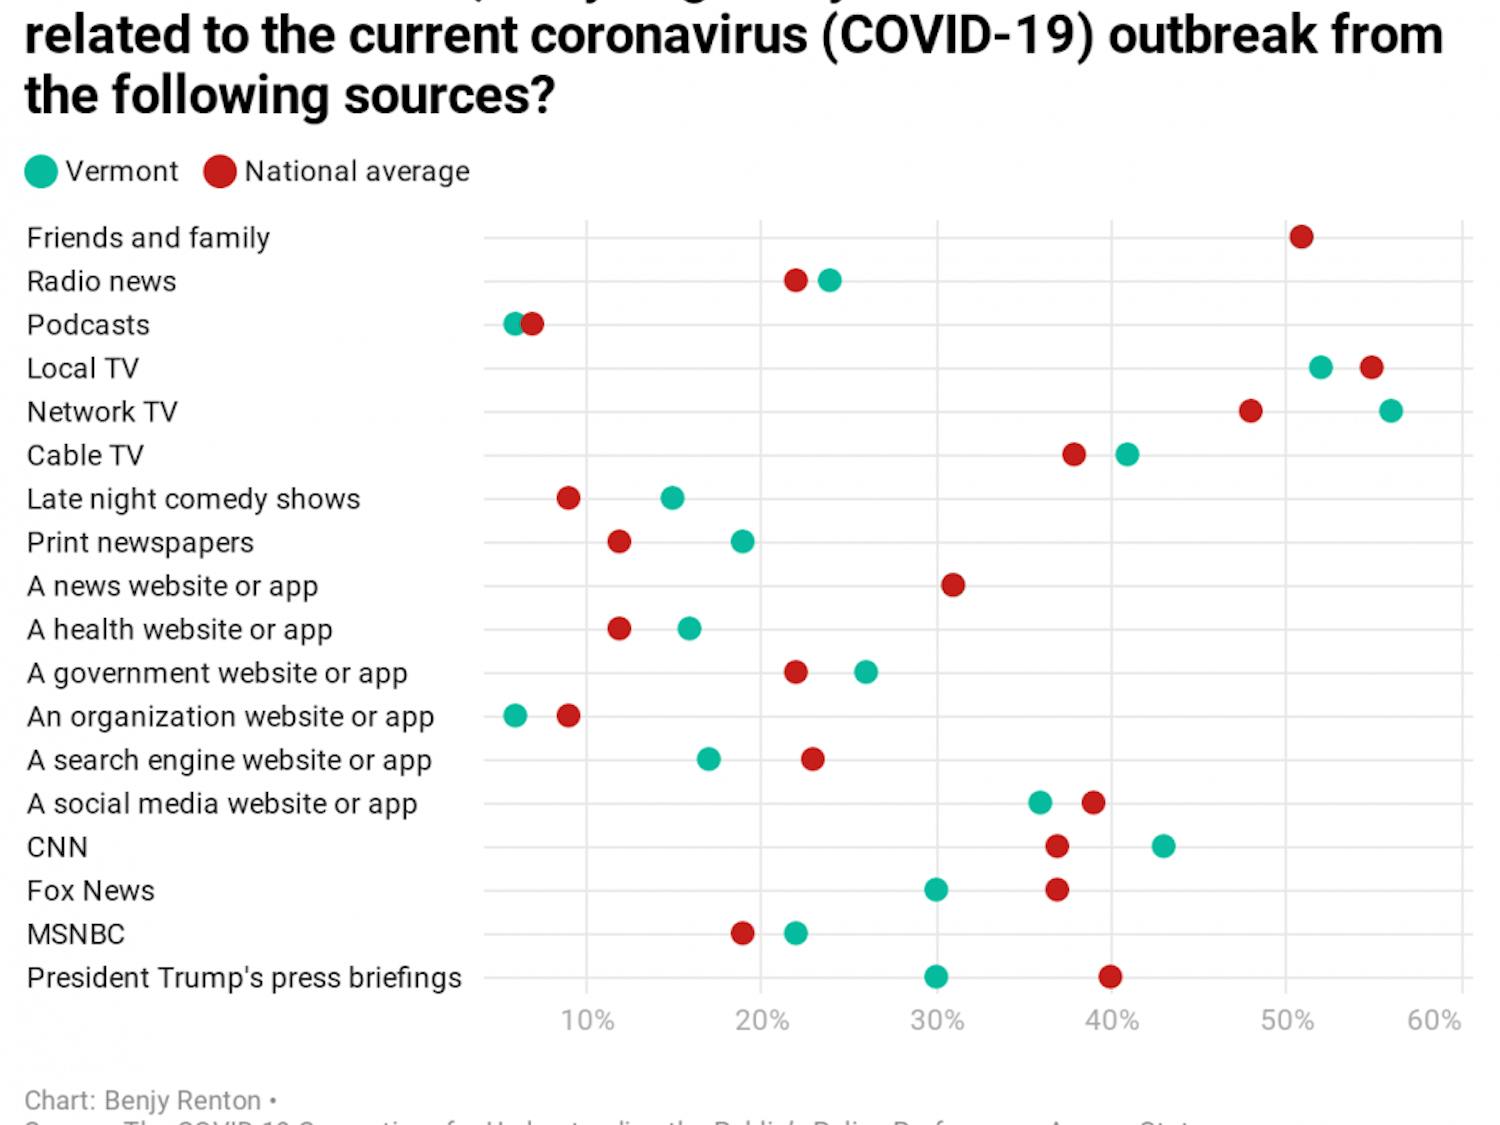 xFbF4-in-the-last-24-hours-did-you-get-any-news-or-information-related-to-the-current-coronavirus-covid-19-outbreak-from-the-following-sources-